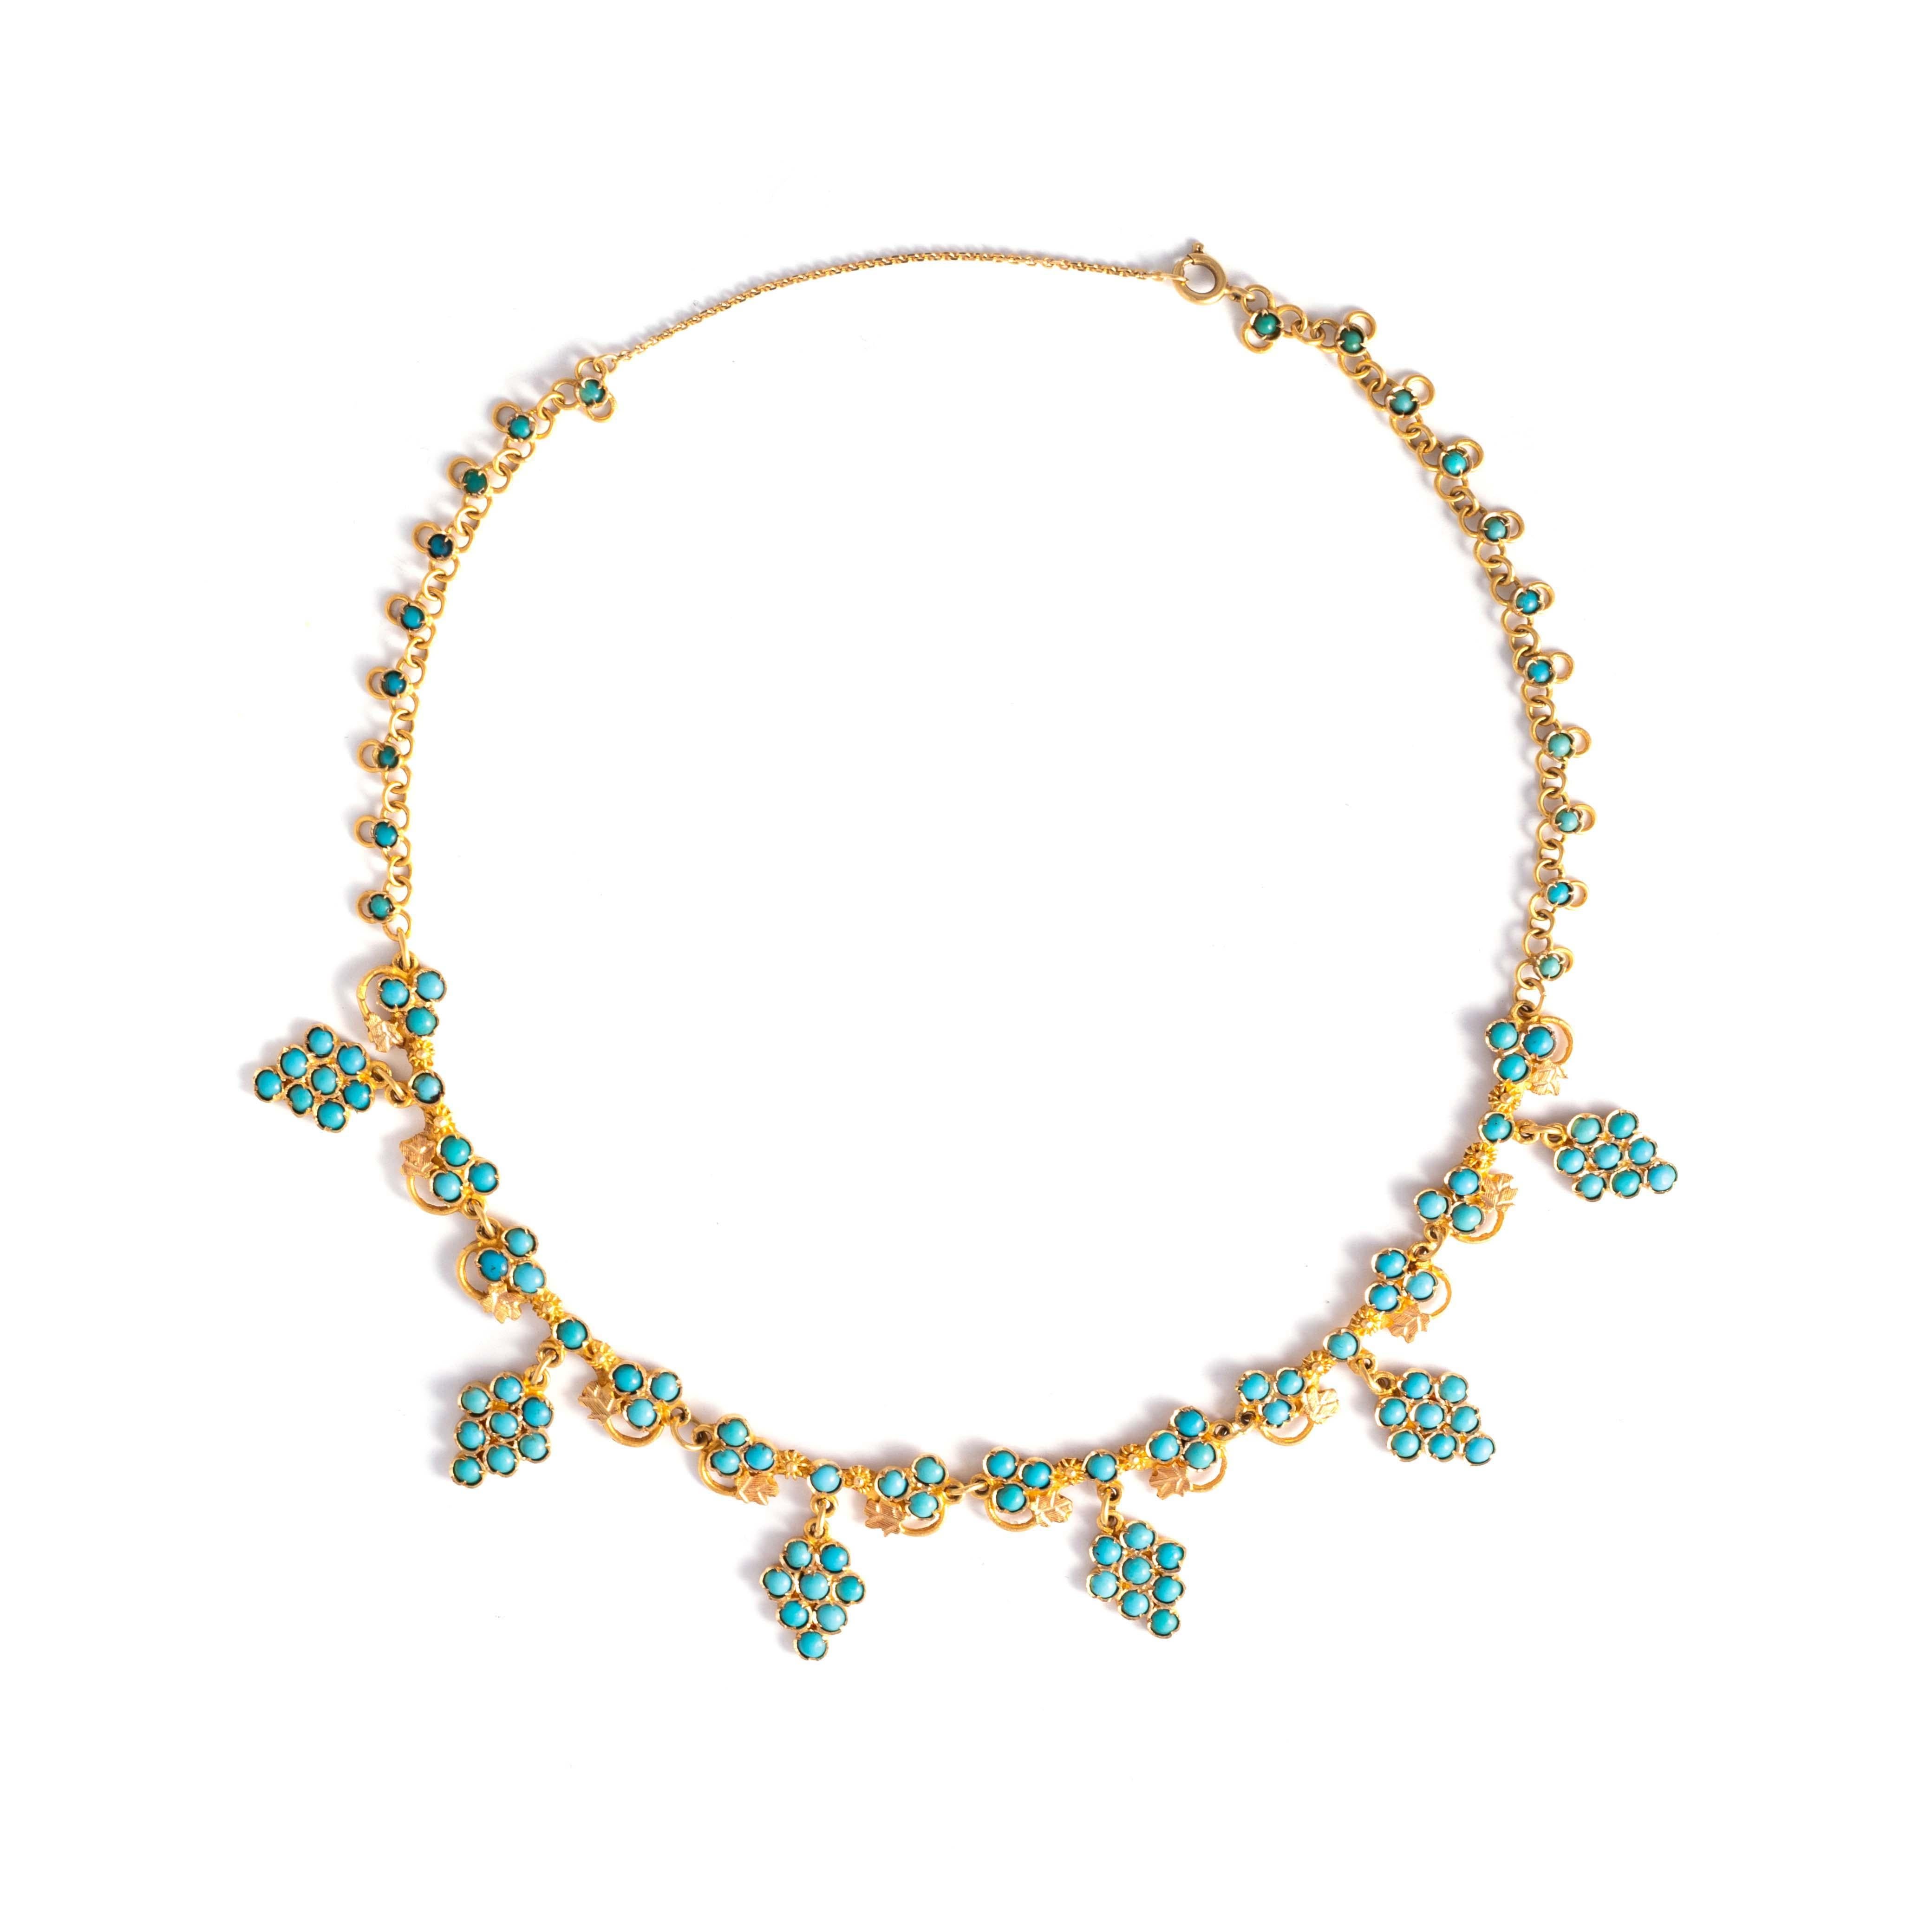 18K yellow gold necklace set by cabochon-cut turquoise (not tested).
Length: 42.80 centimeters. 
Gross weight 27.68 grams.